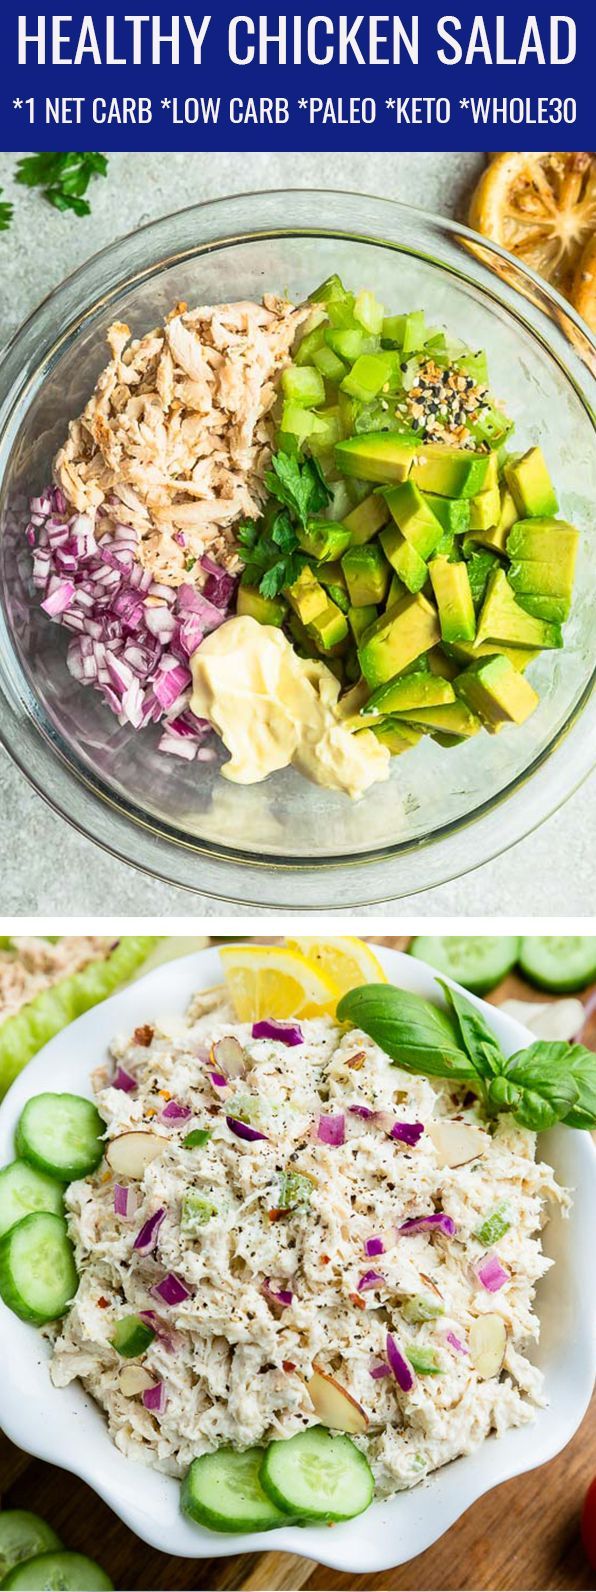 15 healthy recipes Lunch simple ideas